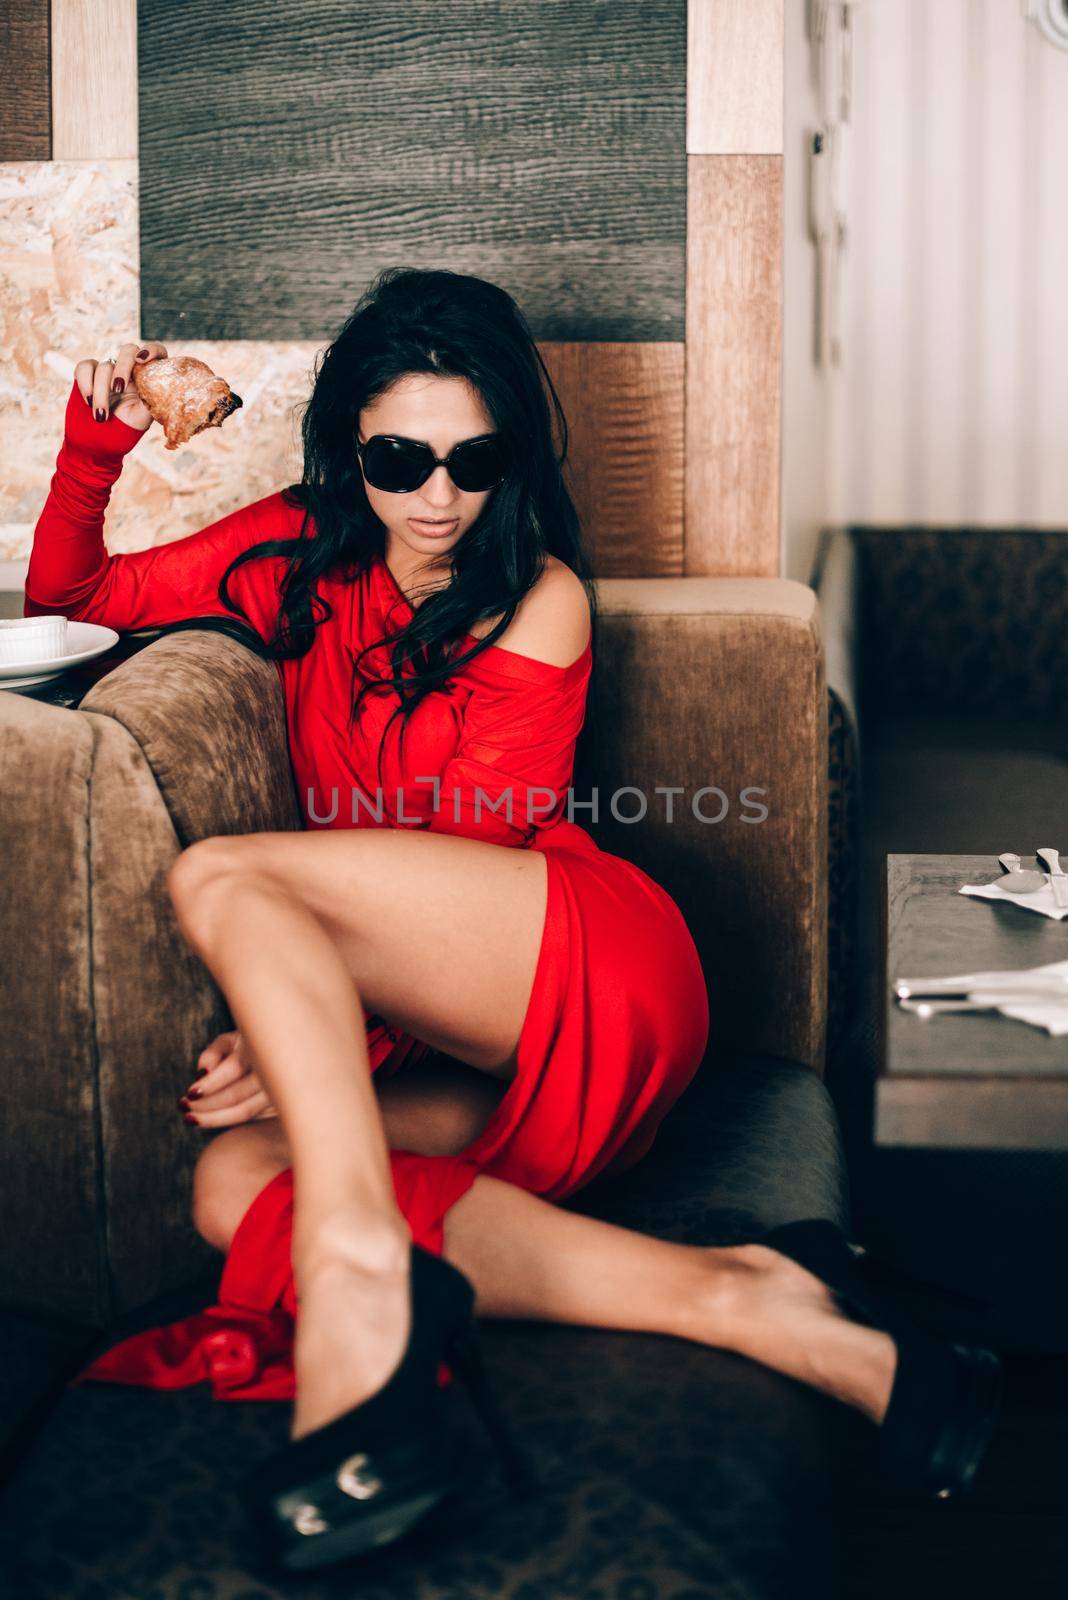 sexy woman in a red dress with black hair eats a croissant. temptation with food. attractive legs. obsession with red. Selective focus, film grain by Ashtray25